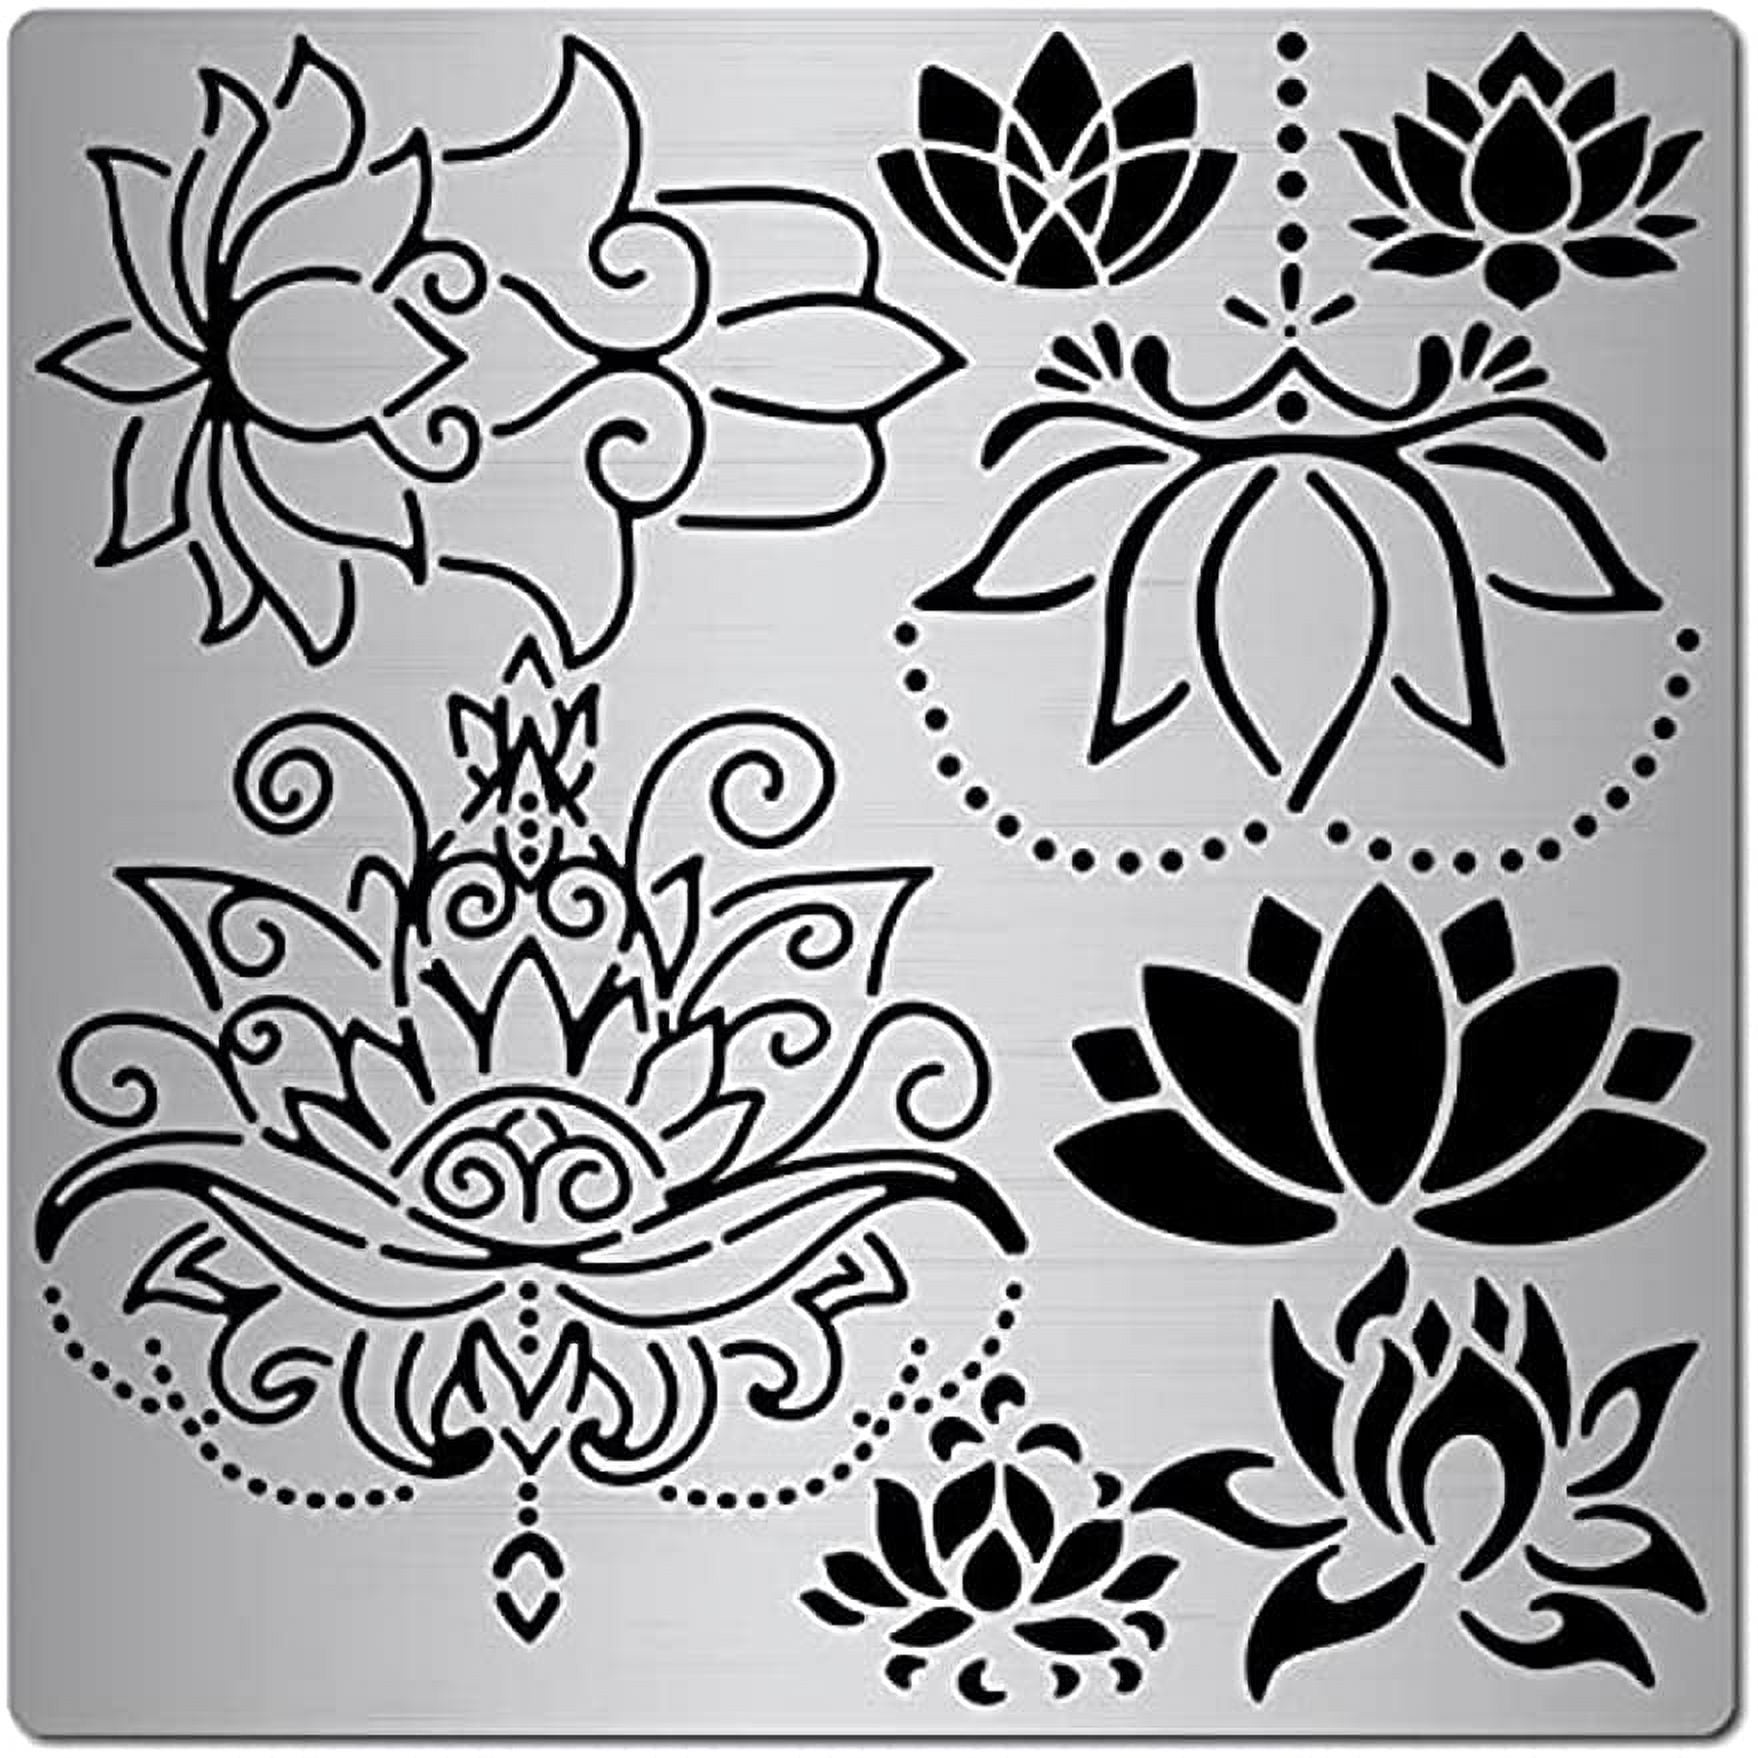 6.3 Inch Lotus Metal Stencil Flower Yoga Stencils Stainless Steel Floral  Painting Reusable Templates Journal Tool for Painting on Wood Wood Burning